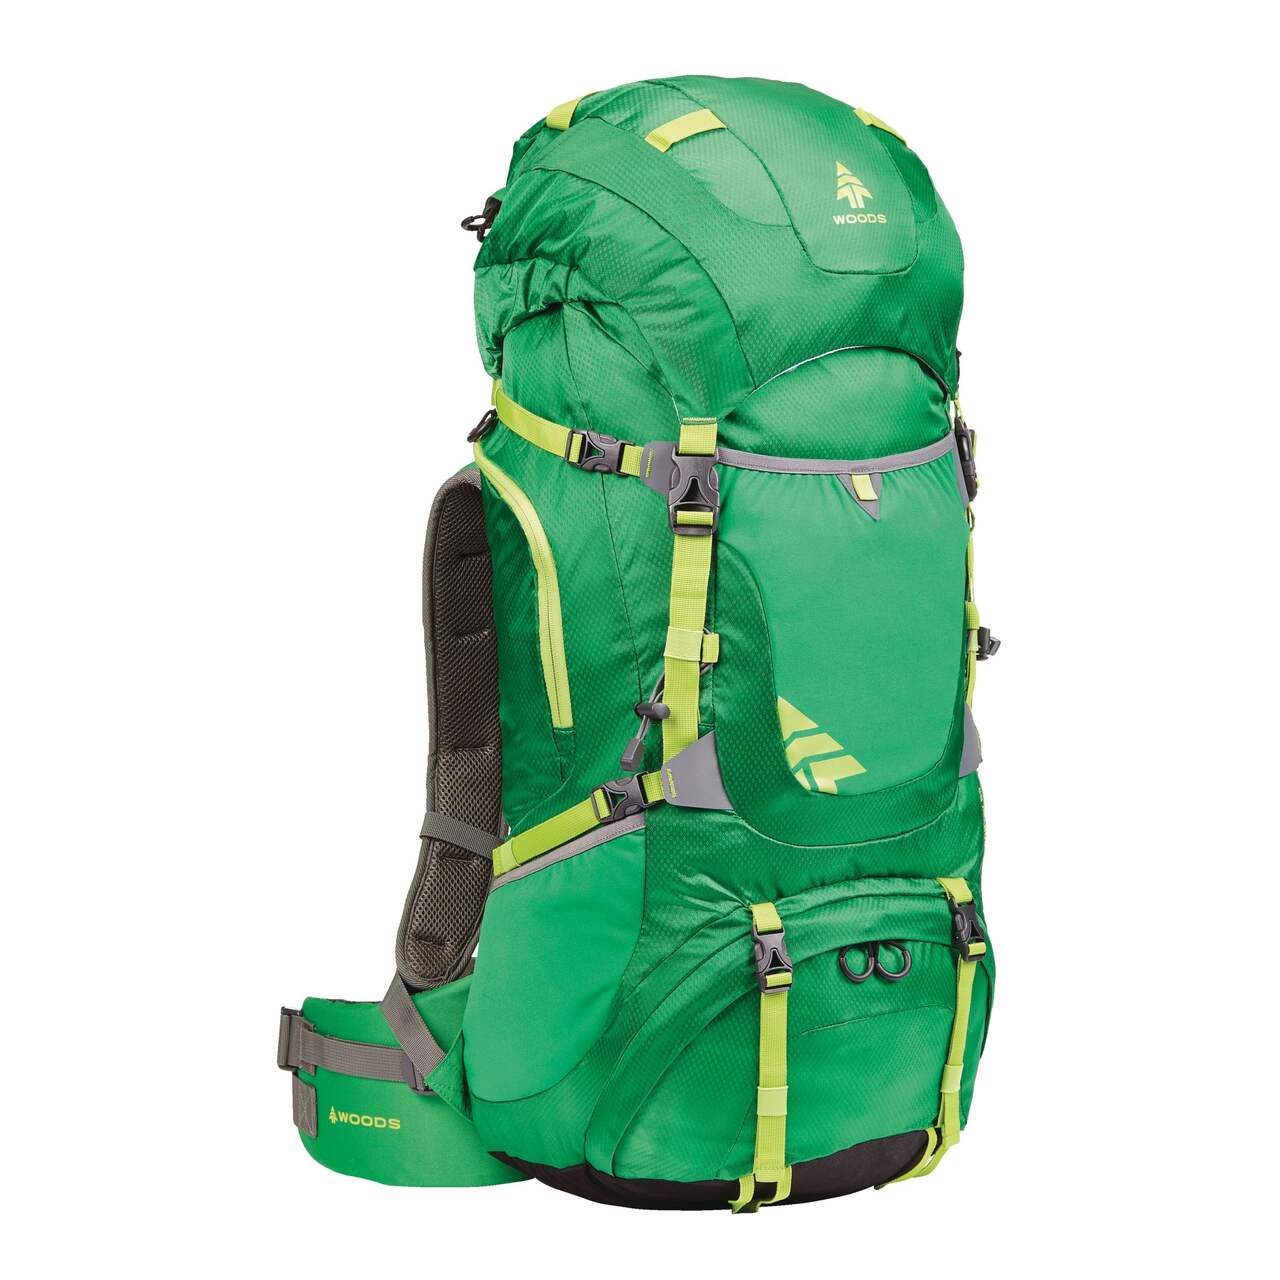 Woods Portage Roll Top Waterproof Dry Backpack For  Camping/Hiking/Canoeing/Kayaking, 65-L